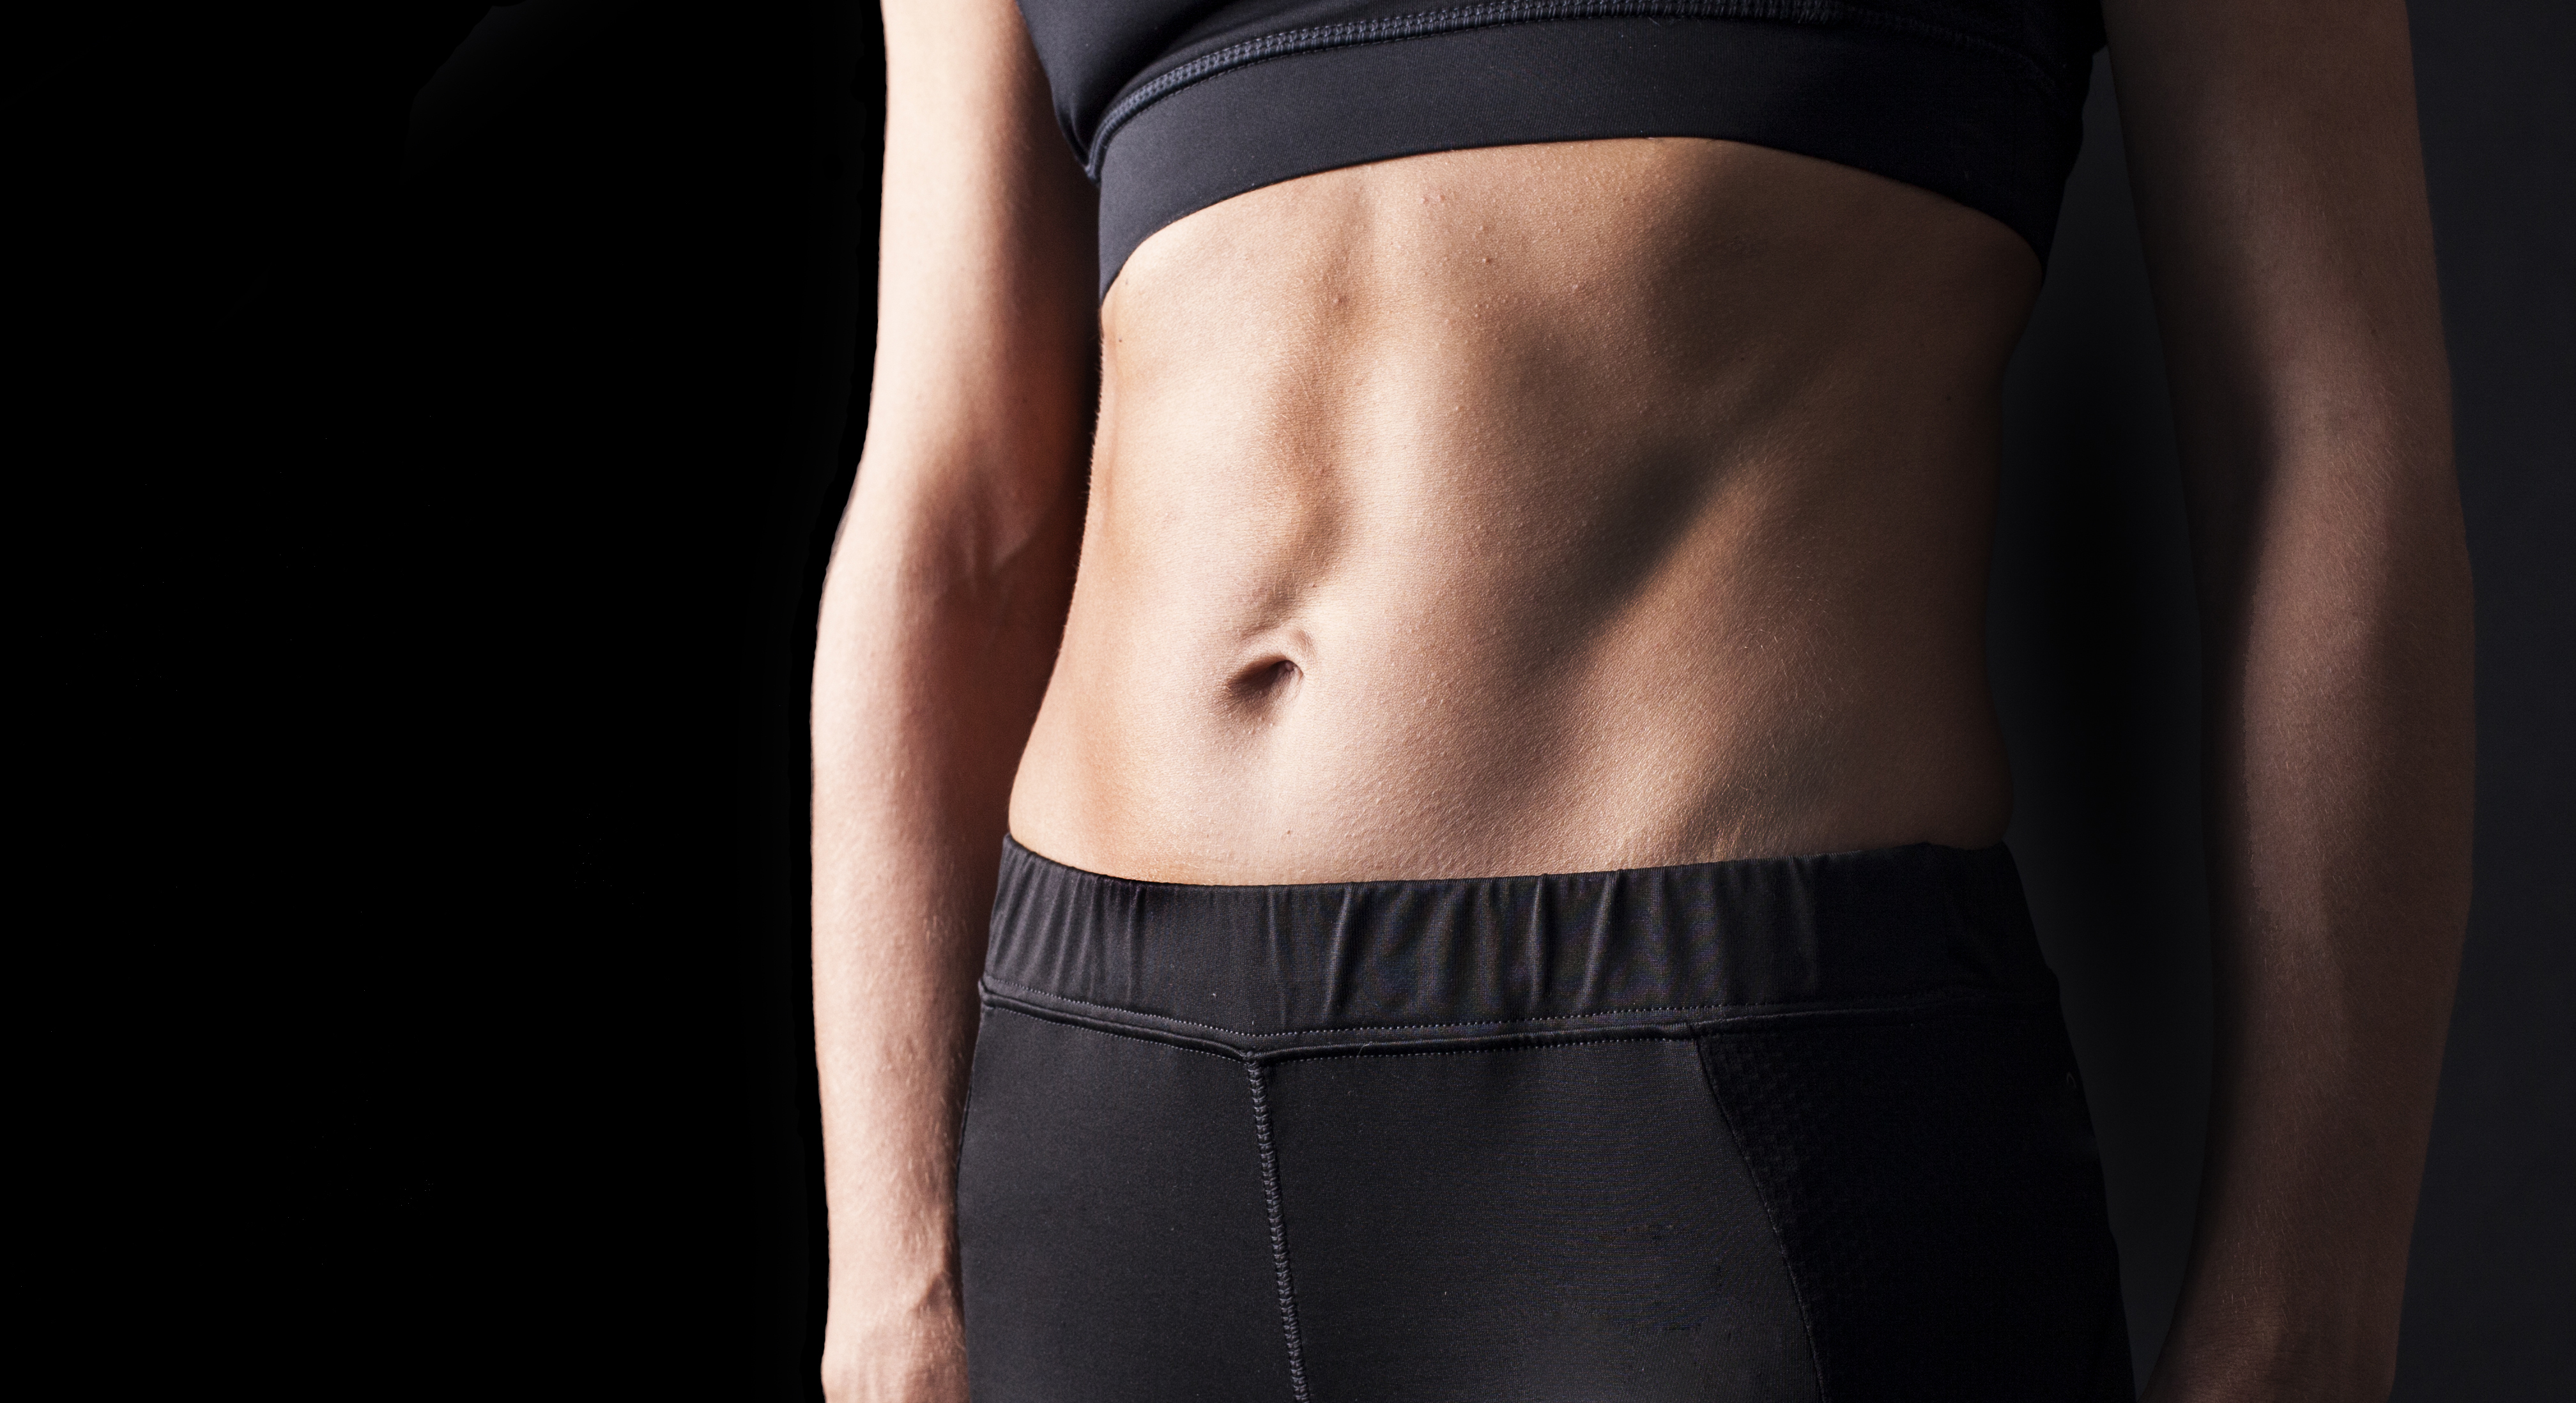 Mini or Full, Which Tummy Tuck is Right for You? - The Plastic Surgery  Channel